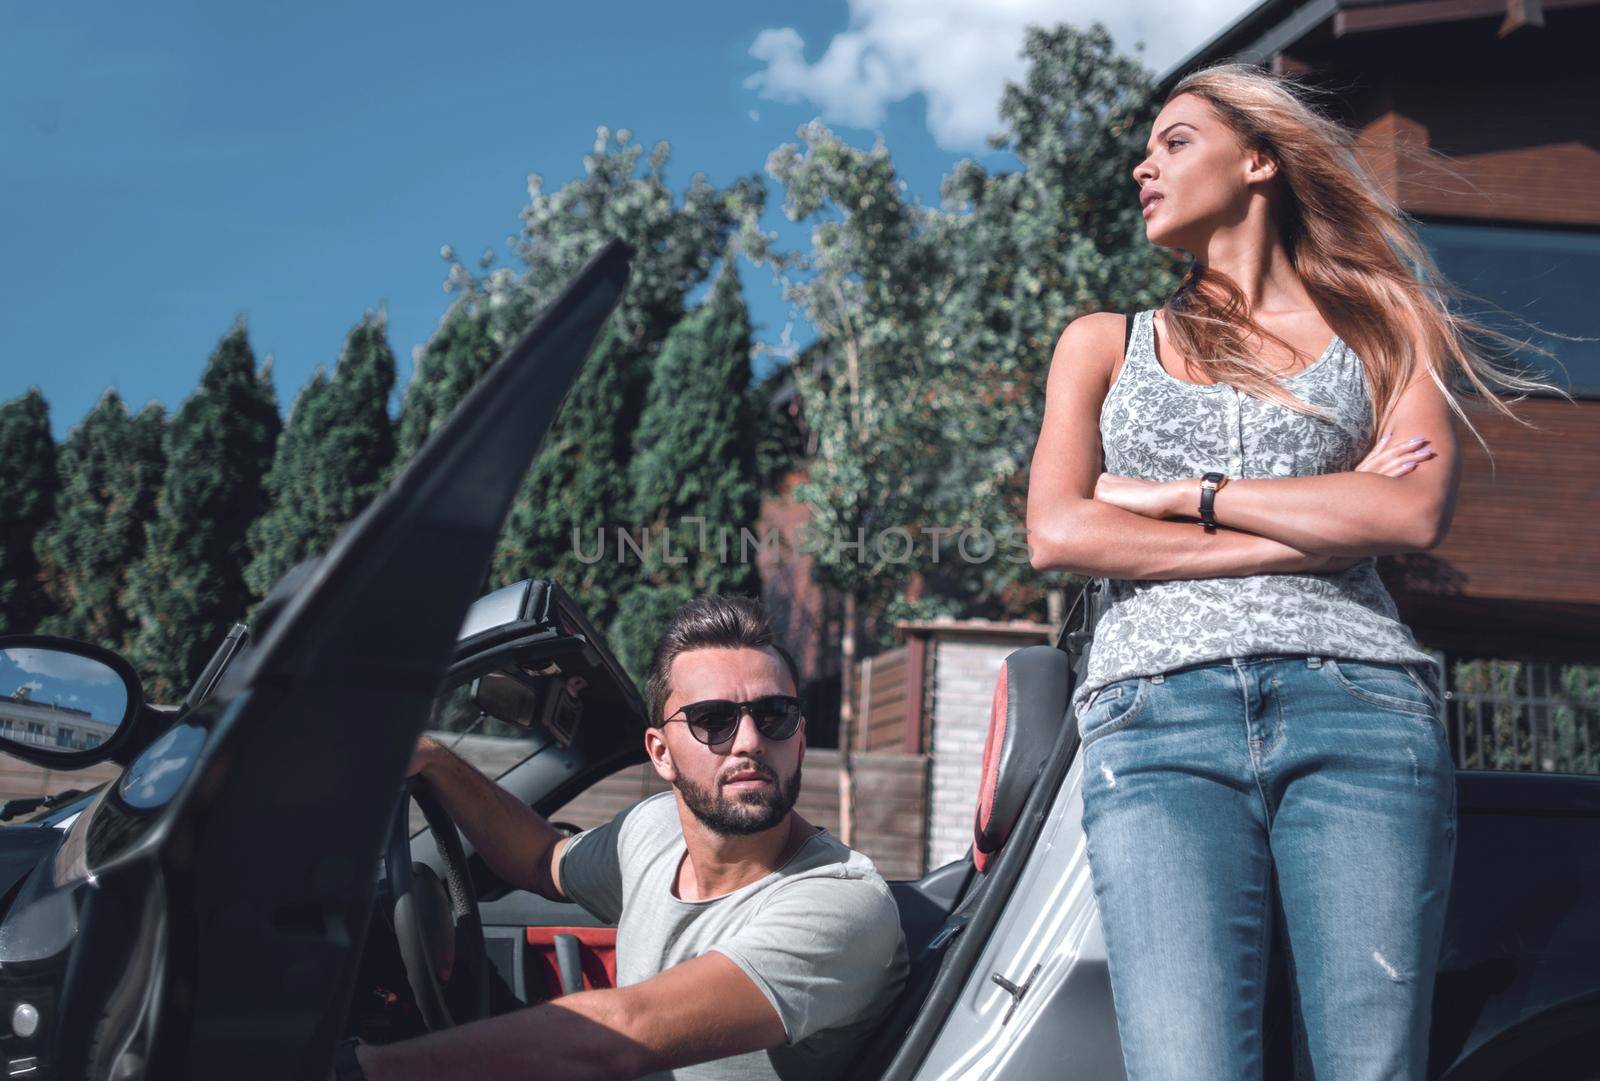 young couple standing near luxury car.the concept of a successful lifestyle